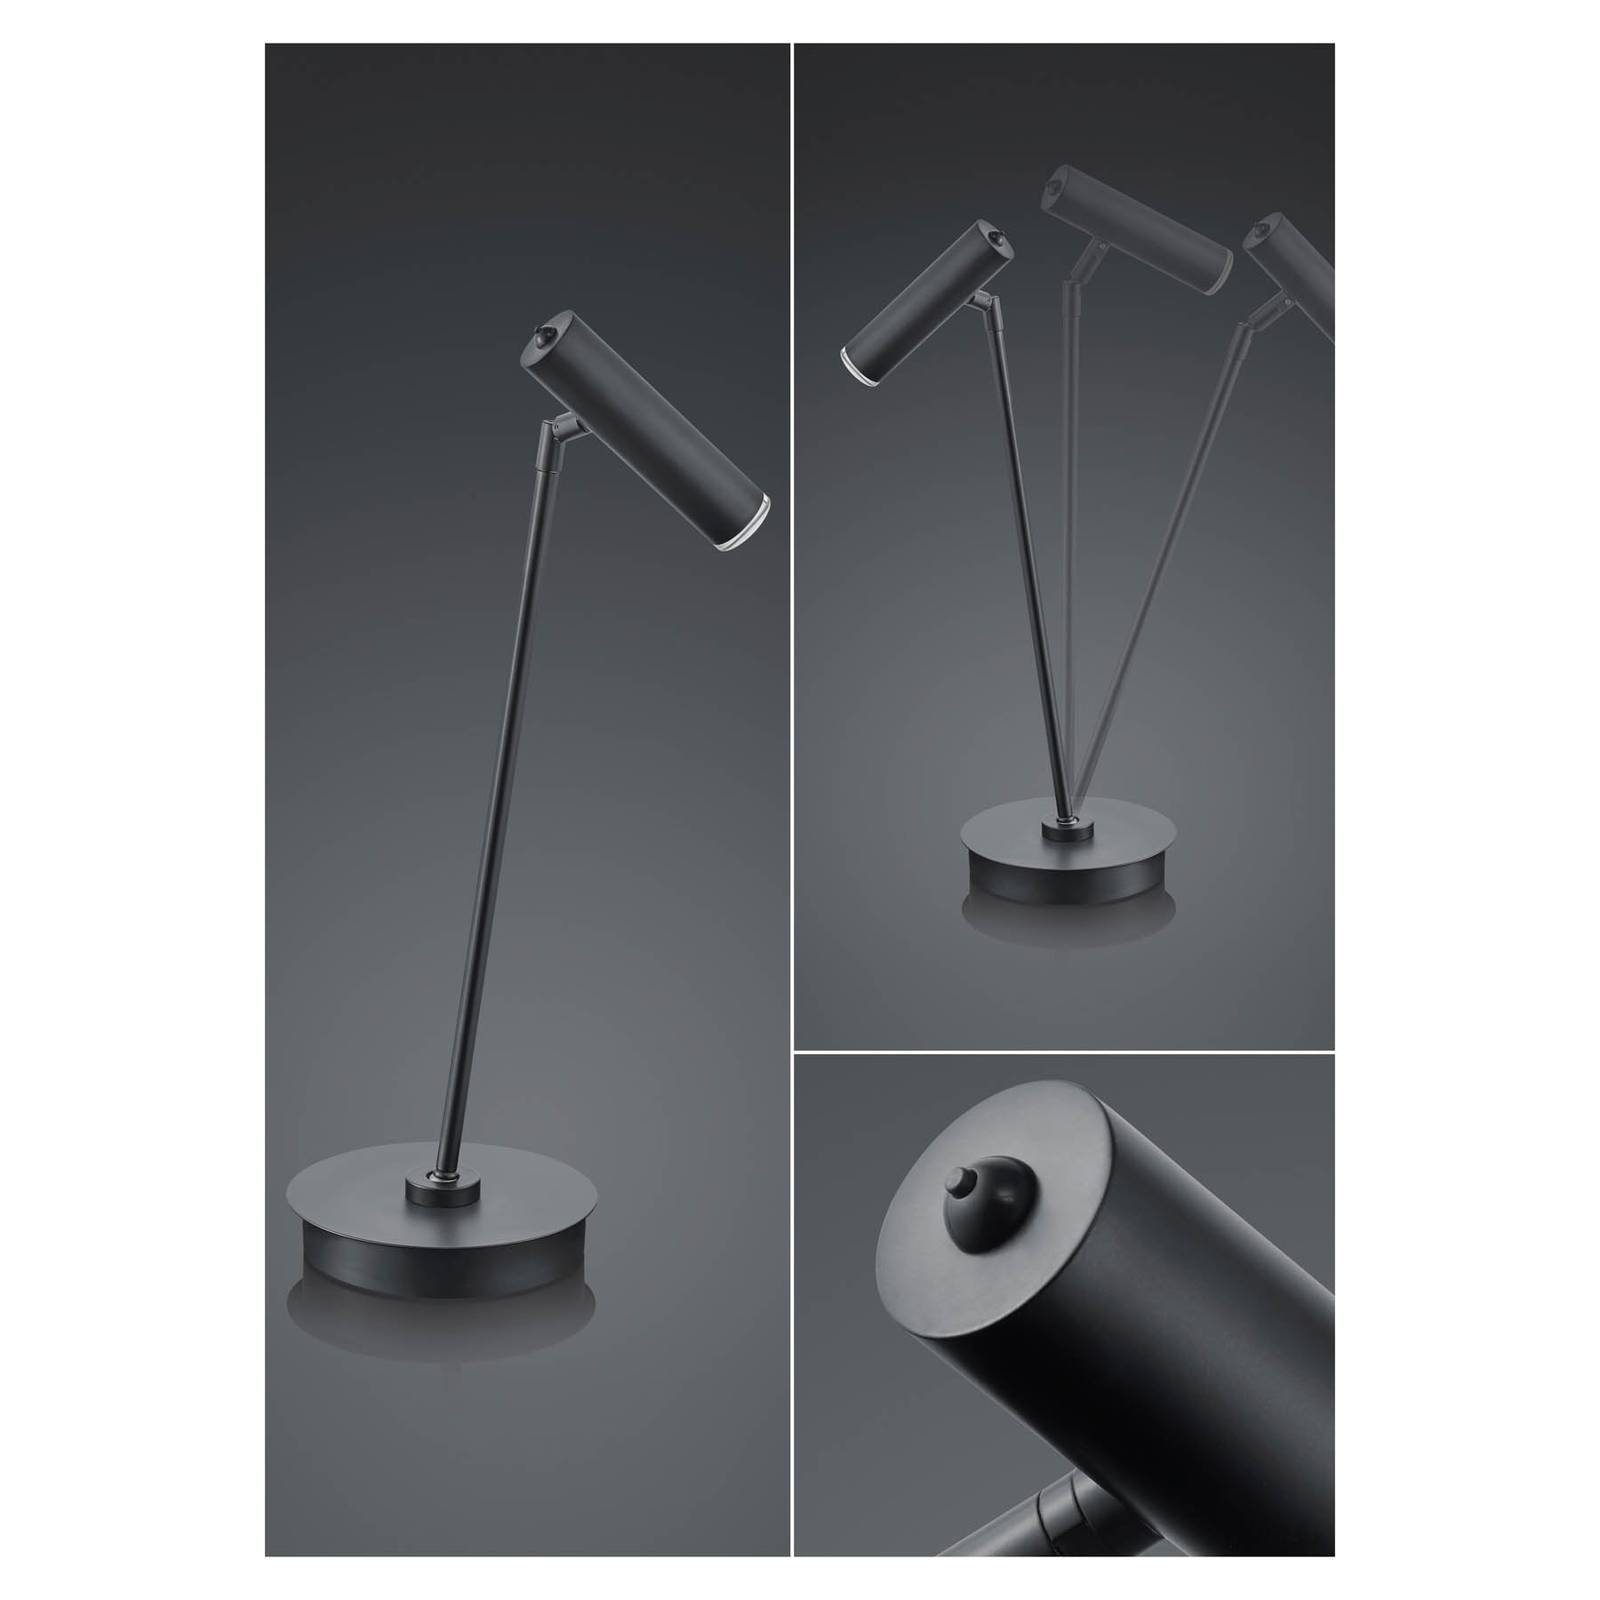 Image of HELL Lampe de table LED Tom, dimmable, noire 4045542225838